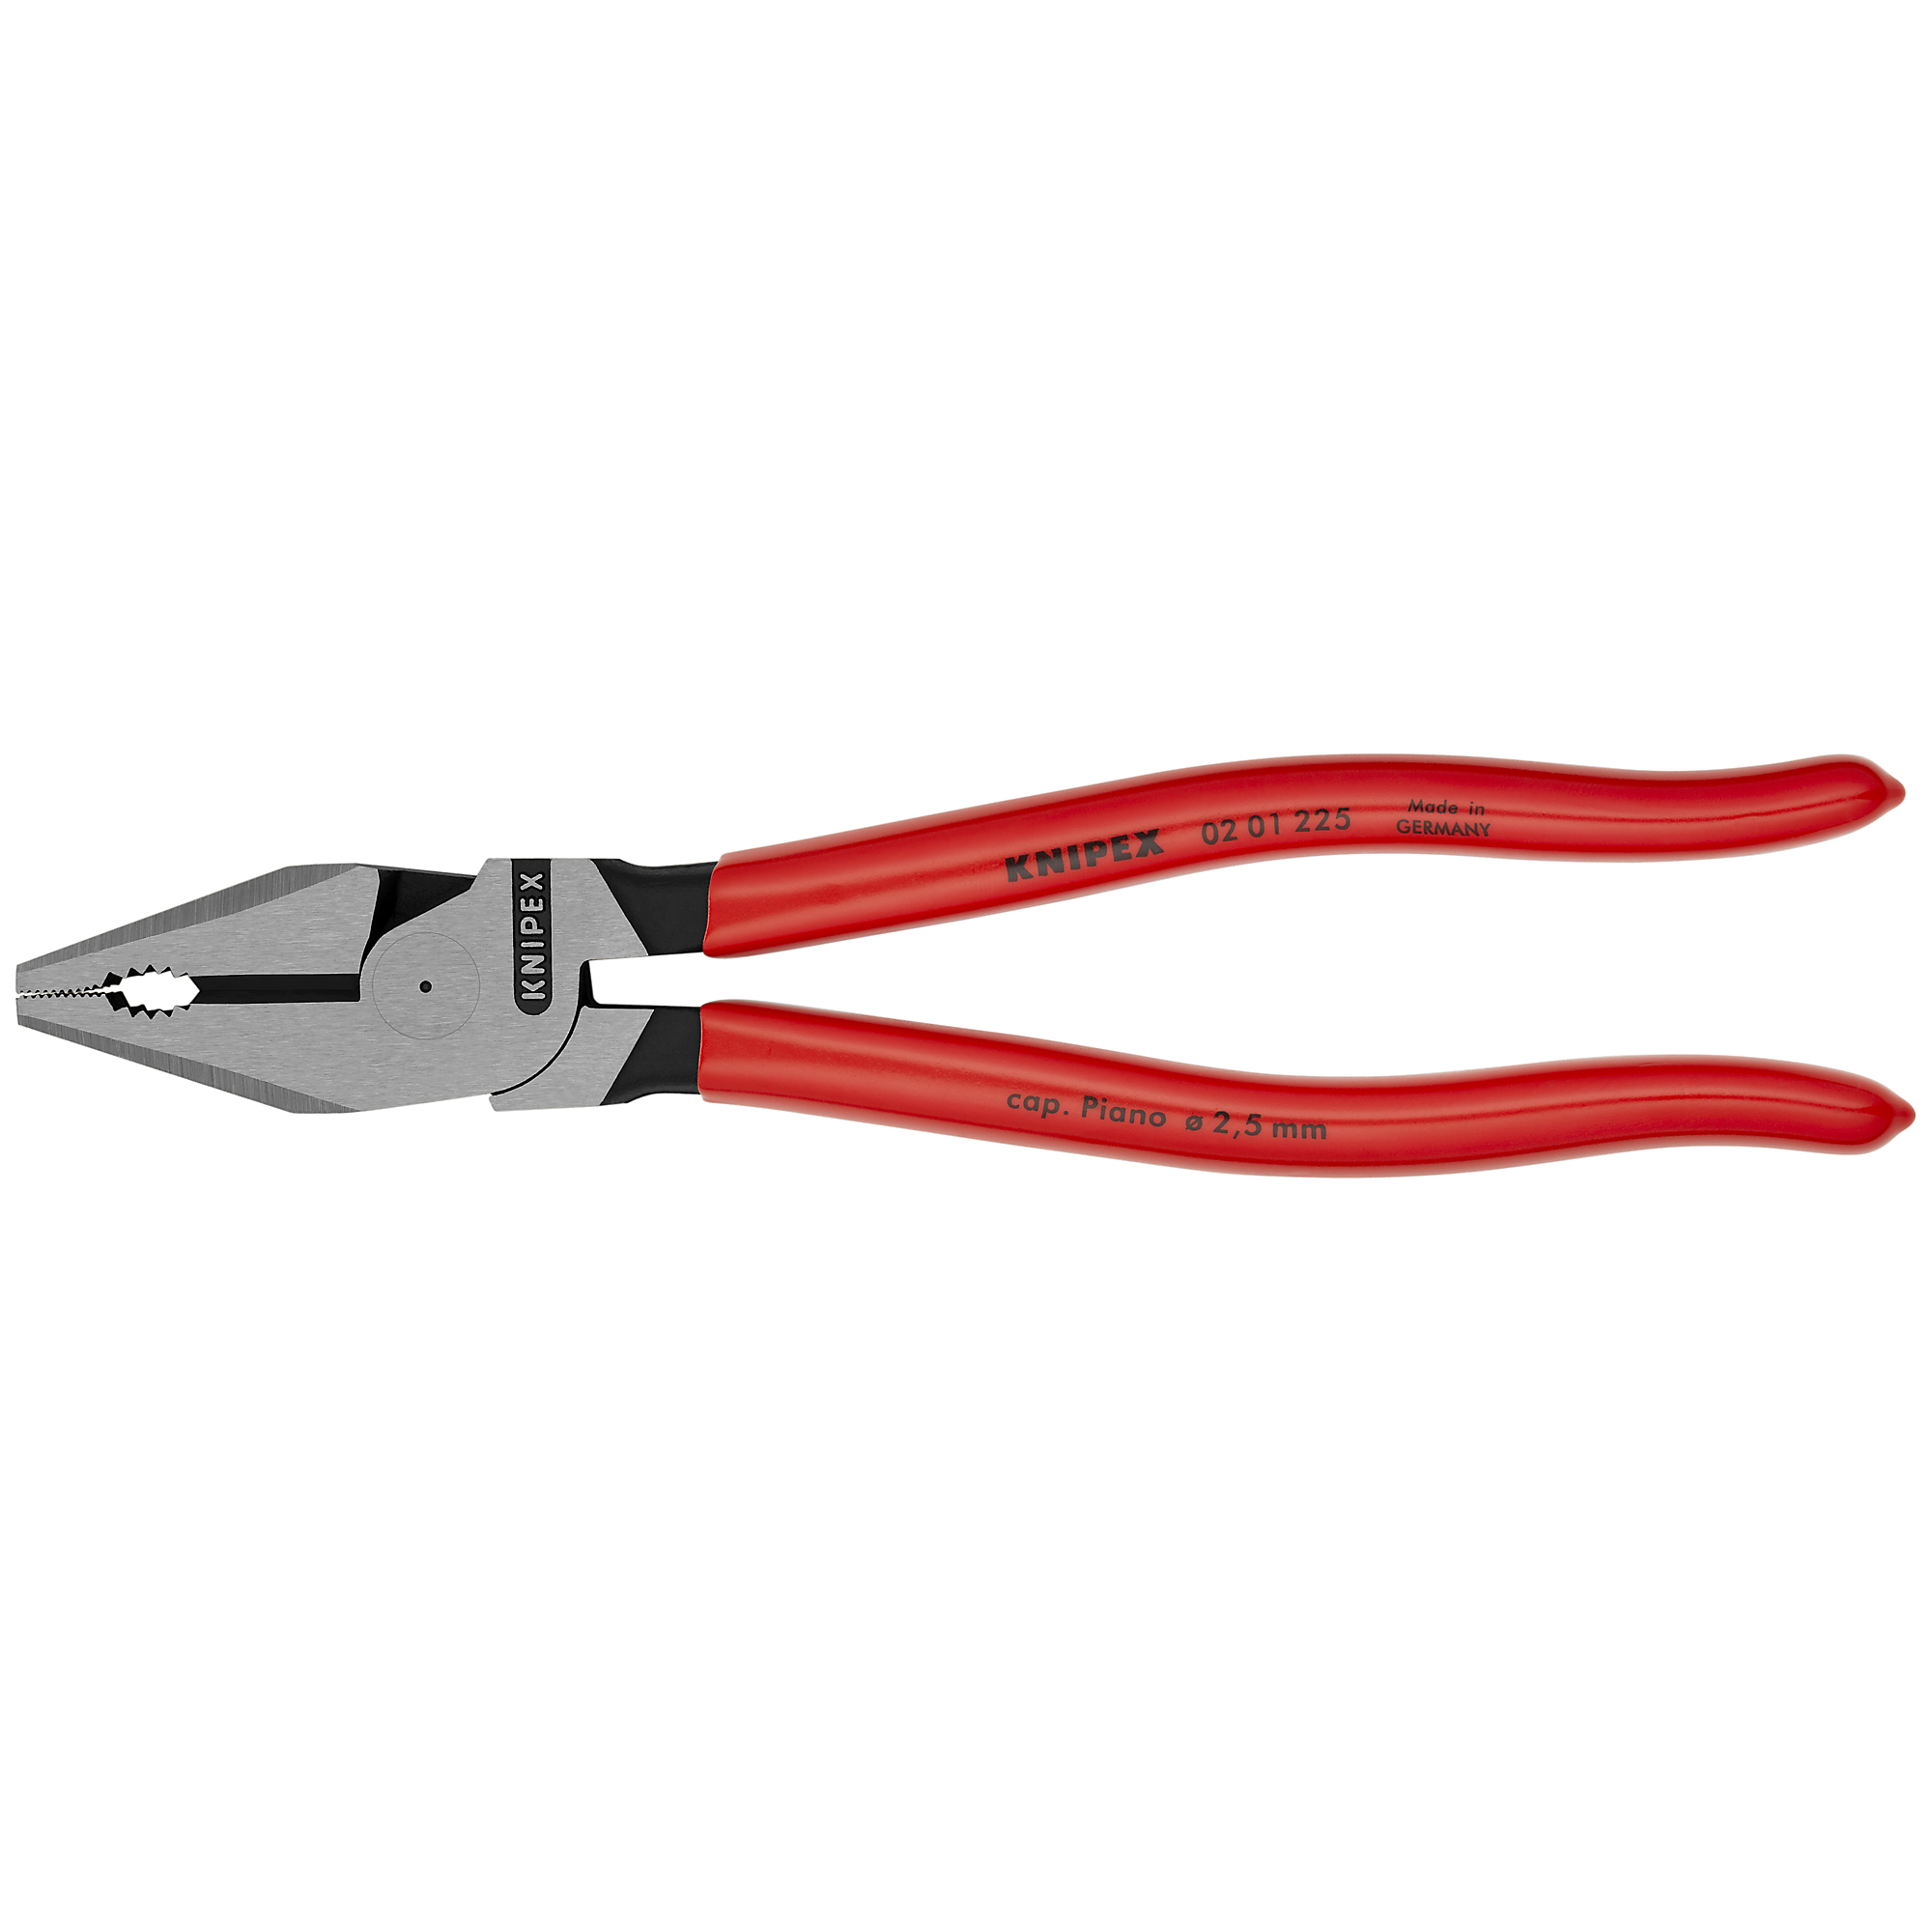 KNIPEX, HL Combination Pliers, Plastic coating, Bulk, 9Inch, Pieces (qty.) 1 Material Steel, Jaw Capacity 0.125 in, Model 02 01 225